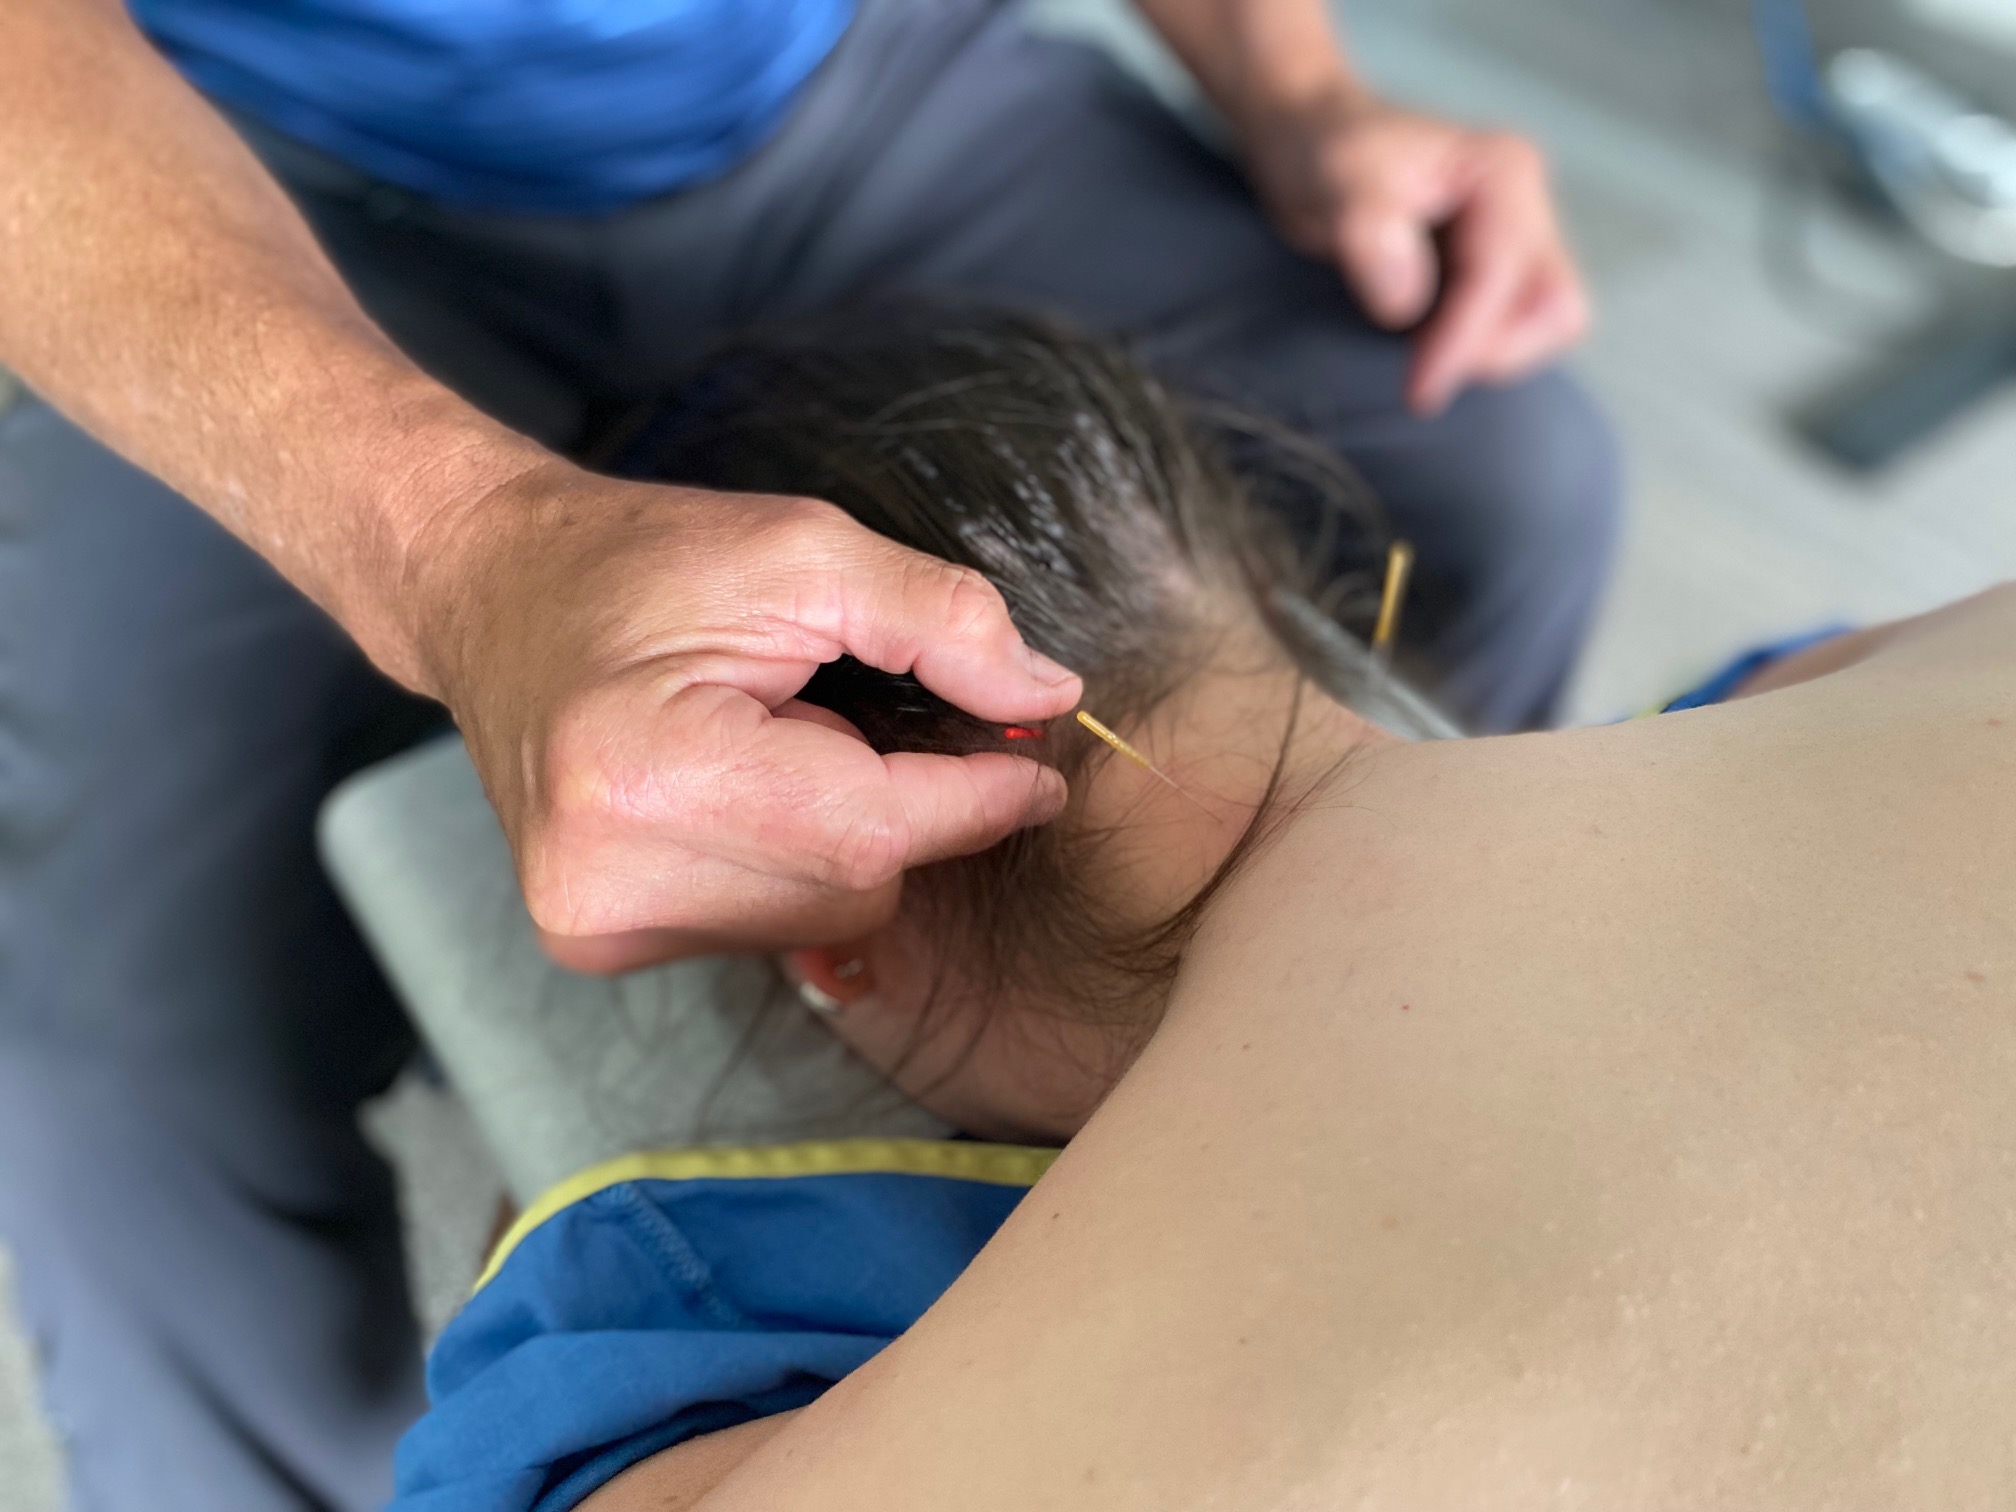 Dry Needling on the neck of a patient to relieve muscle tension and muscle spasms